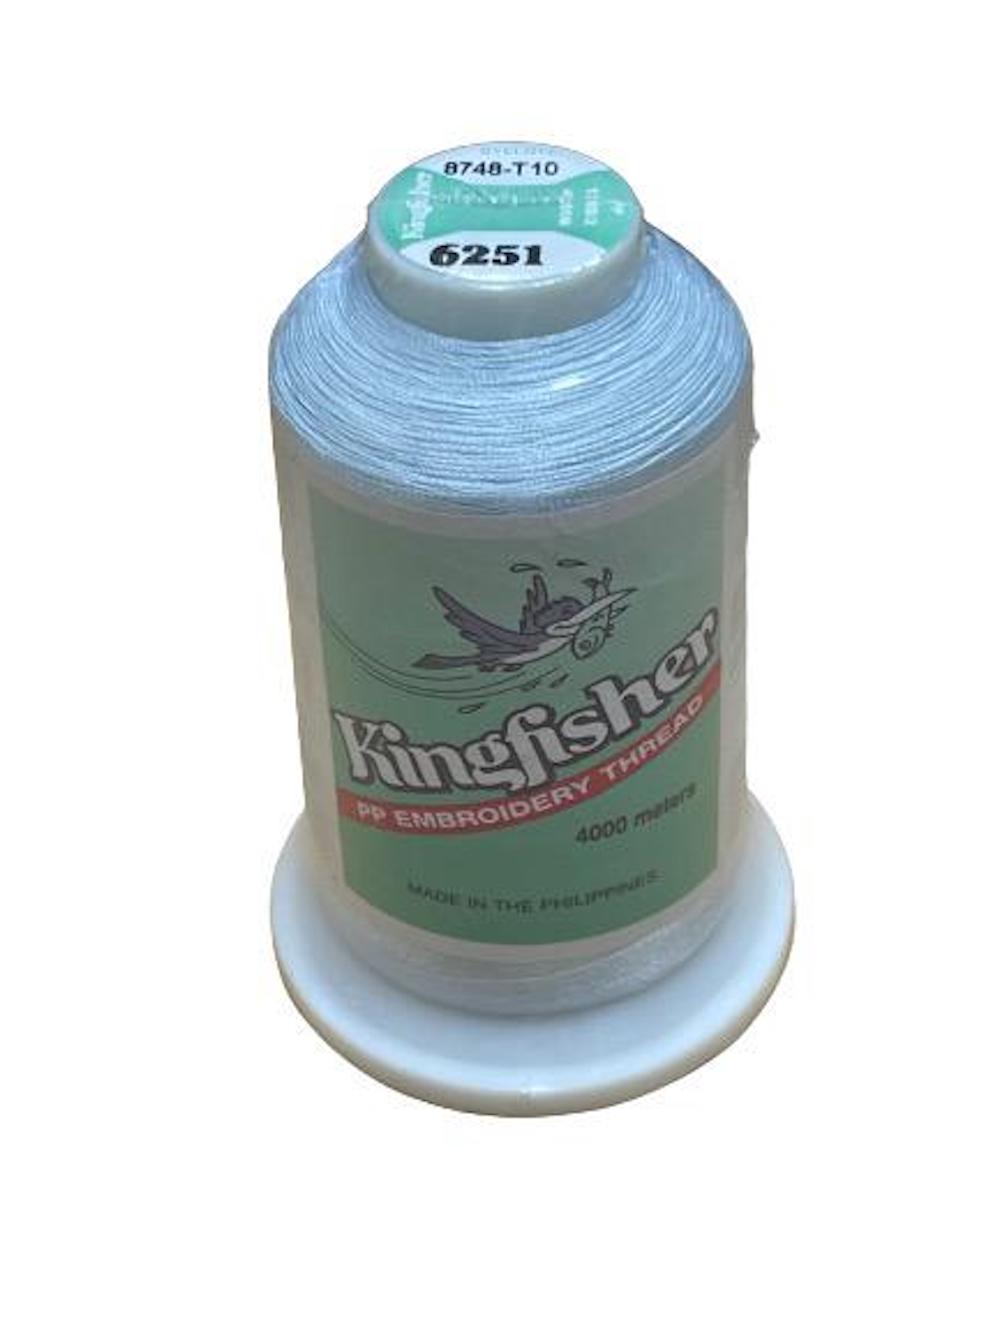 King Fisher Embroidery Thread 4000m 6251 - MY SEWING MALL